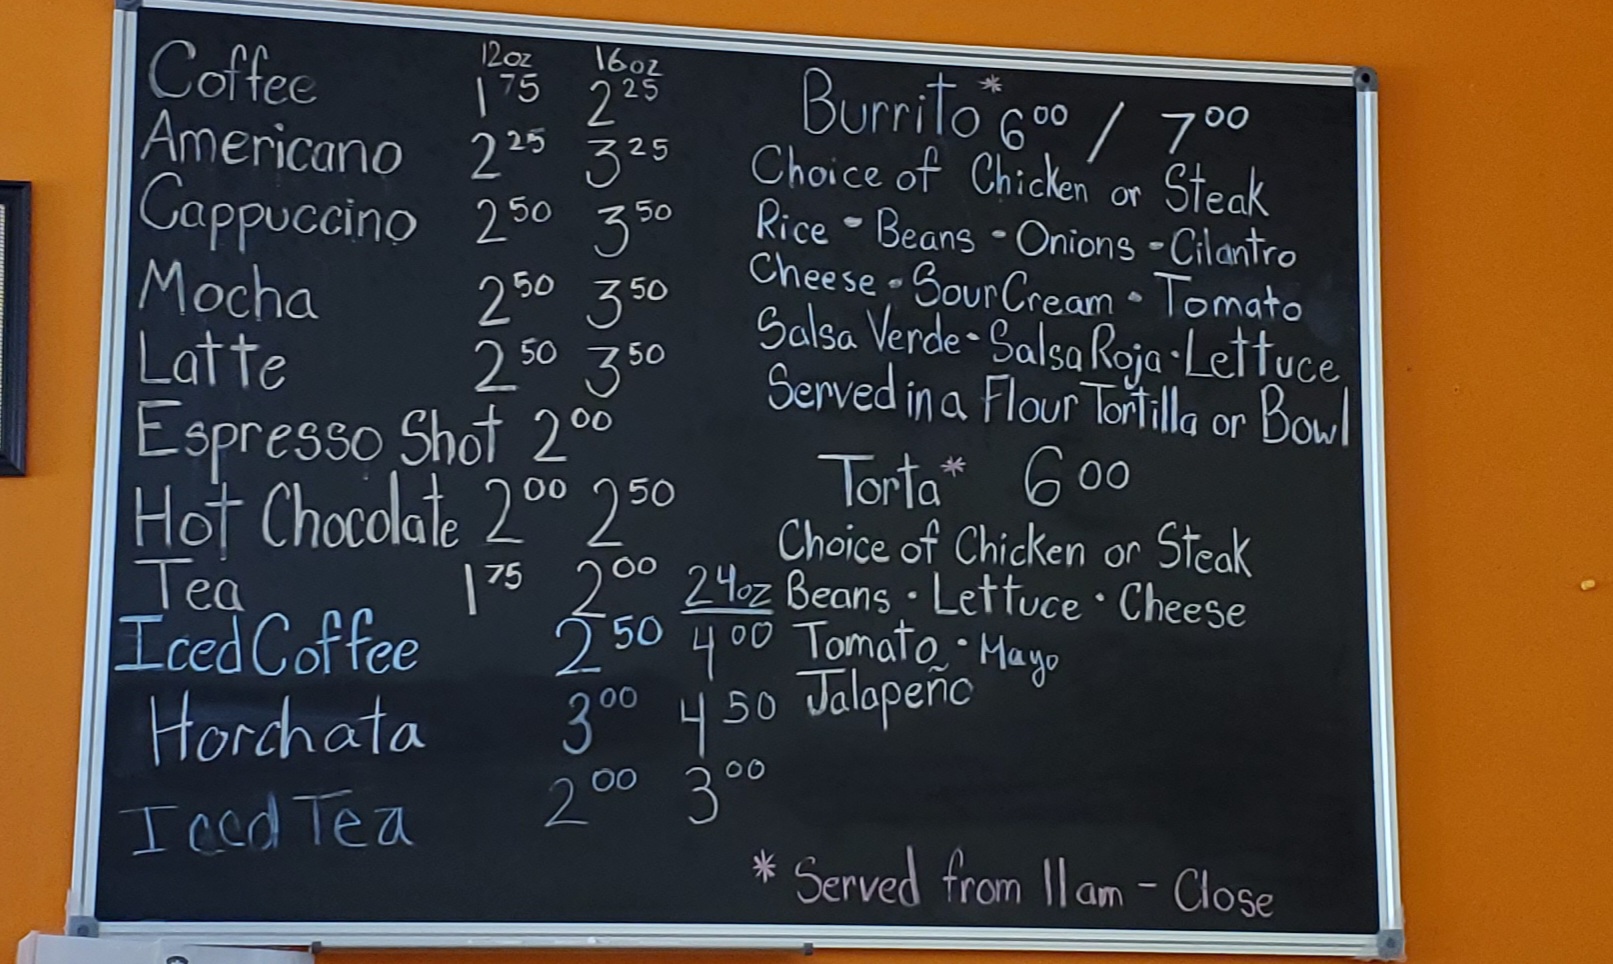 The handwritten menu at Rick's is on a black chalkboard hung on an orange wall. Photo by Carl Busch.